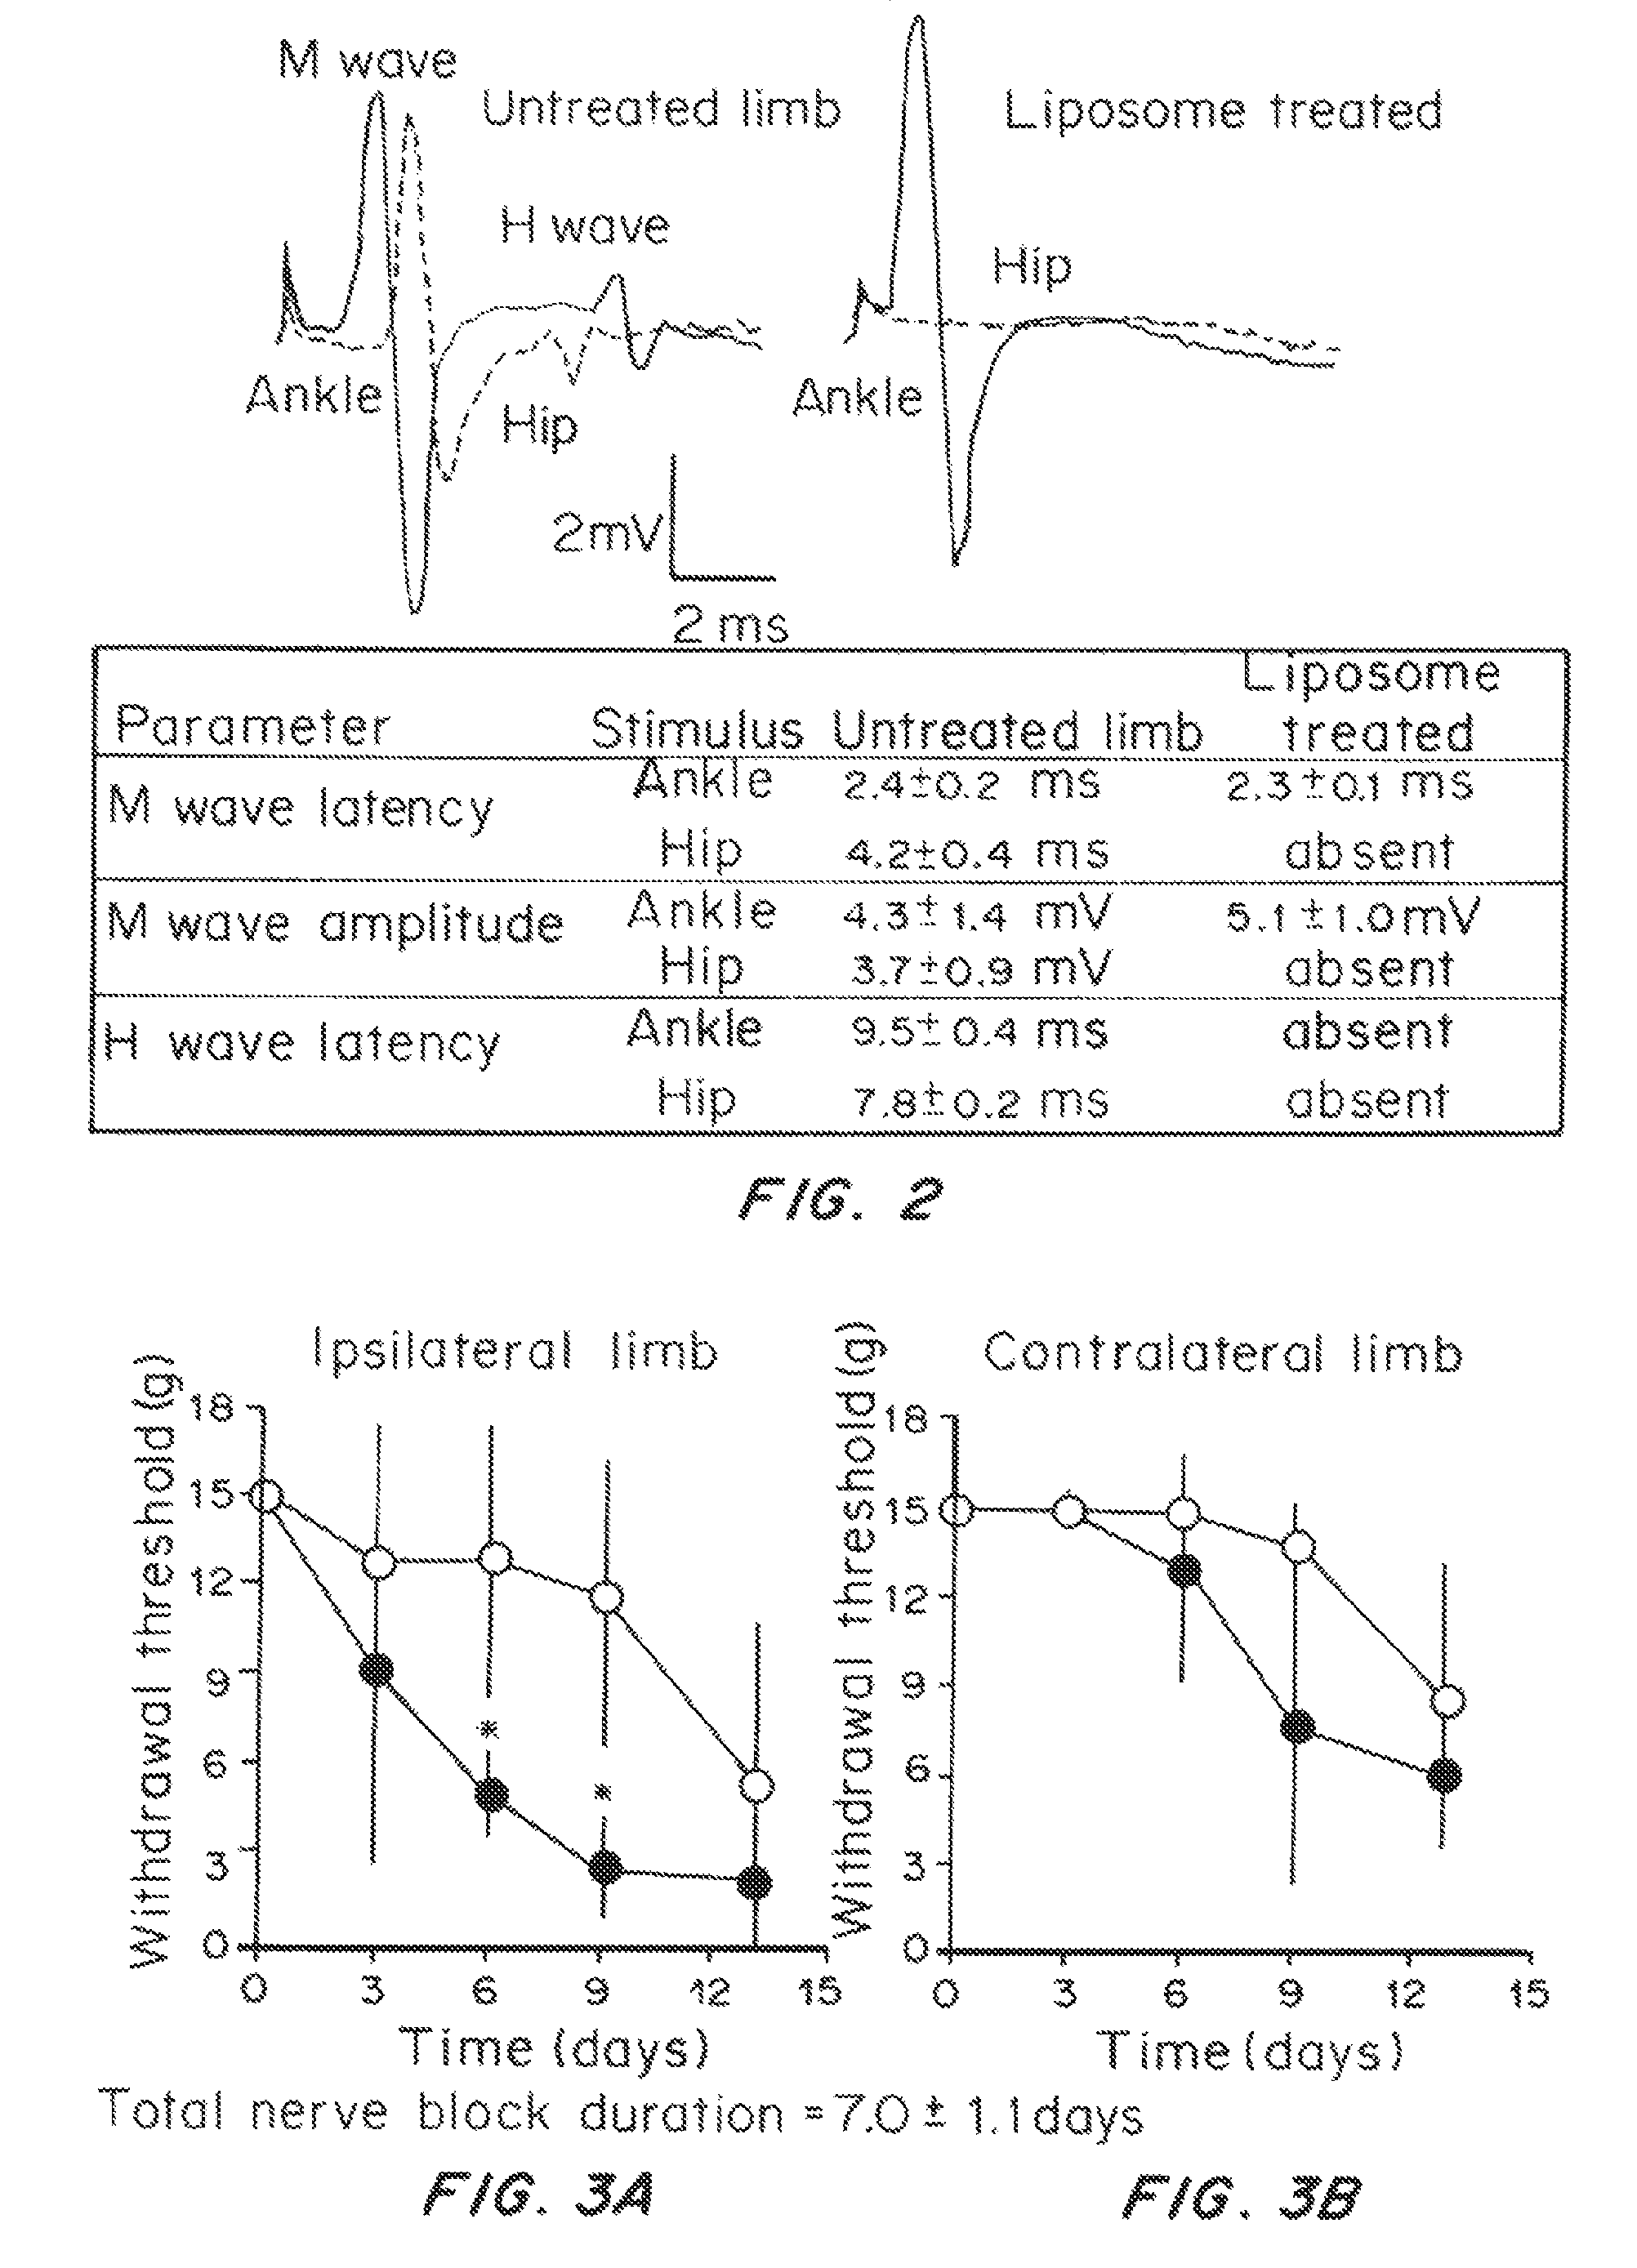 Formulations and methods for delaying onset of chronic neuropathic pain